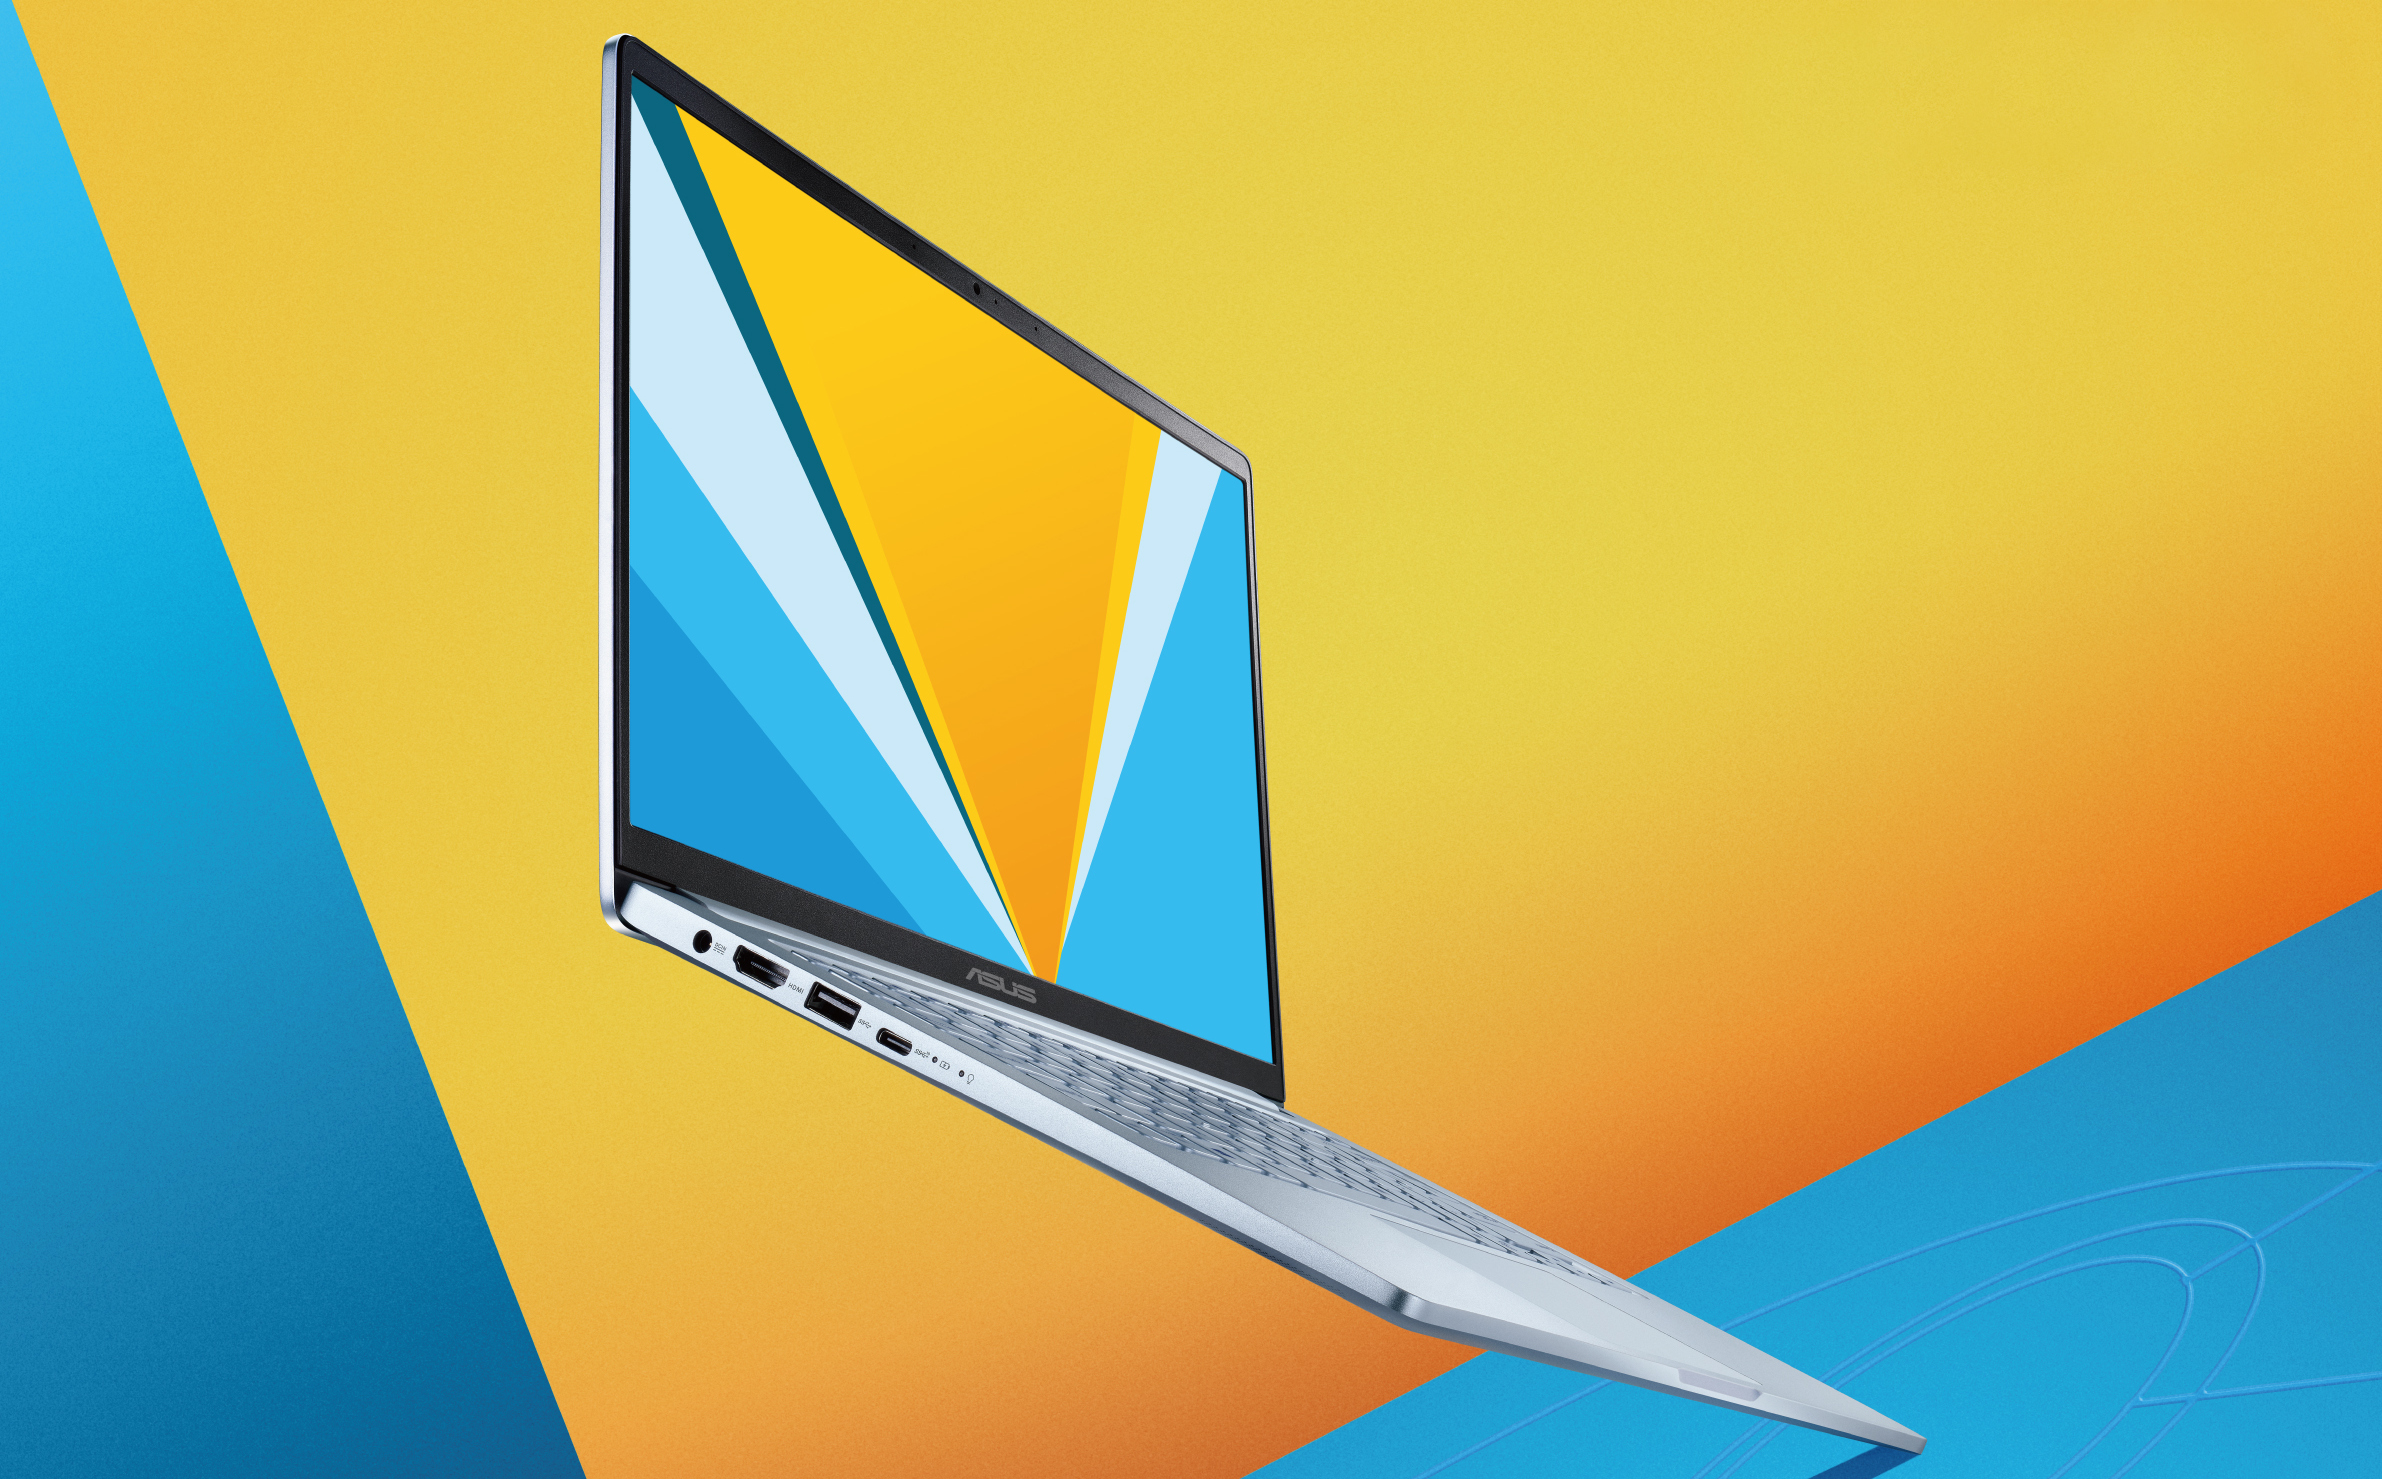 Asus Adds Three New And Affordable Laptops To Its Vivobook Series In